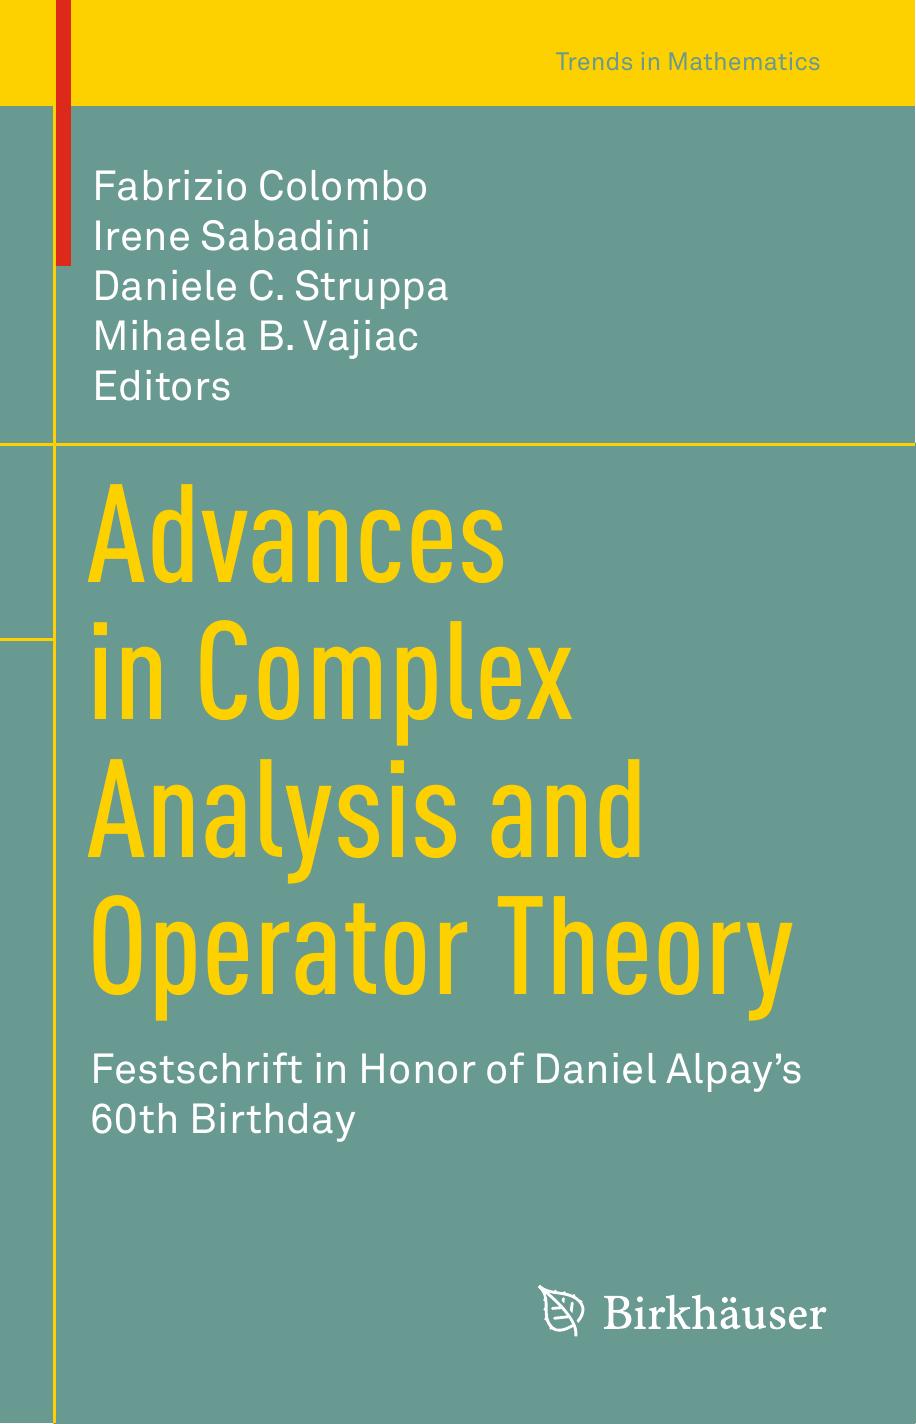 Advances in Complex Analysis and Operator Theory: Festschrift in Honor of Daniel Alpay’s 60th Birthday